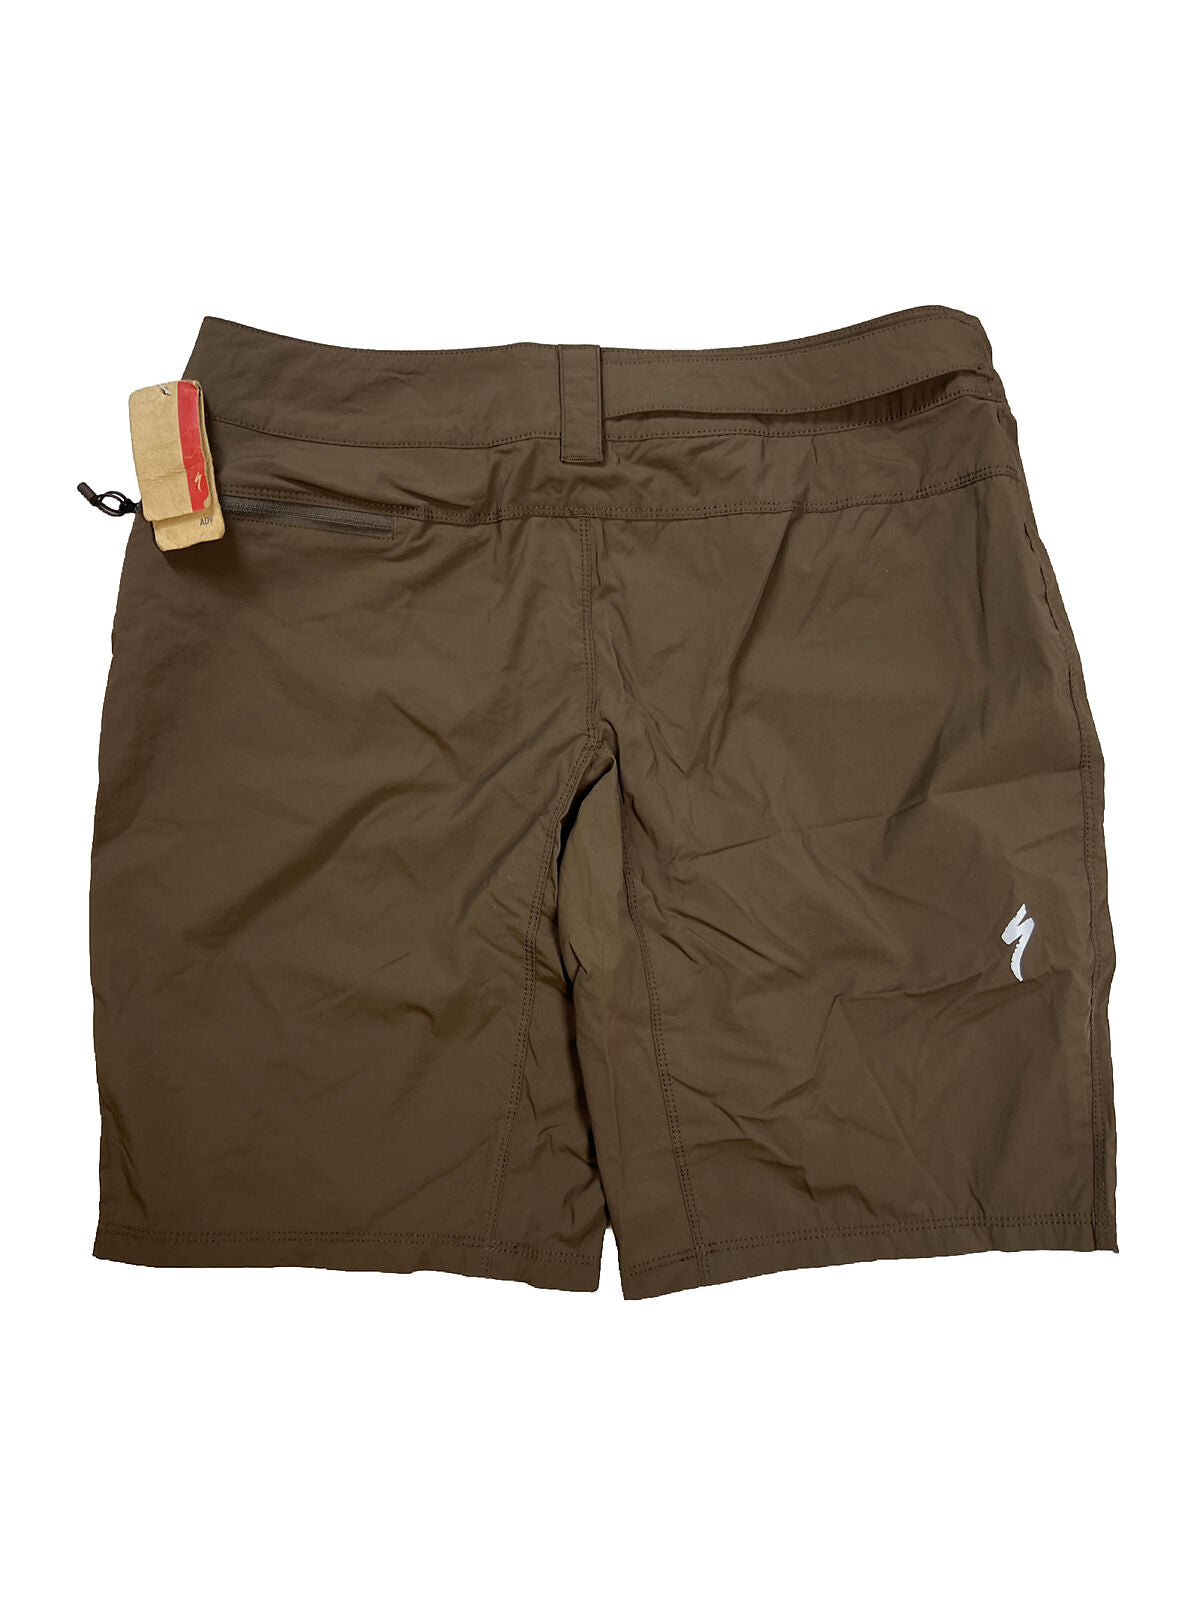 NEW Specialized Women's Brown ADV Trail Air Shorts - L